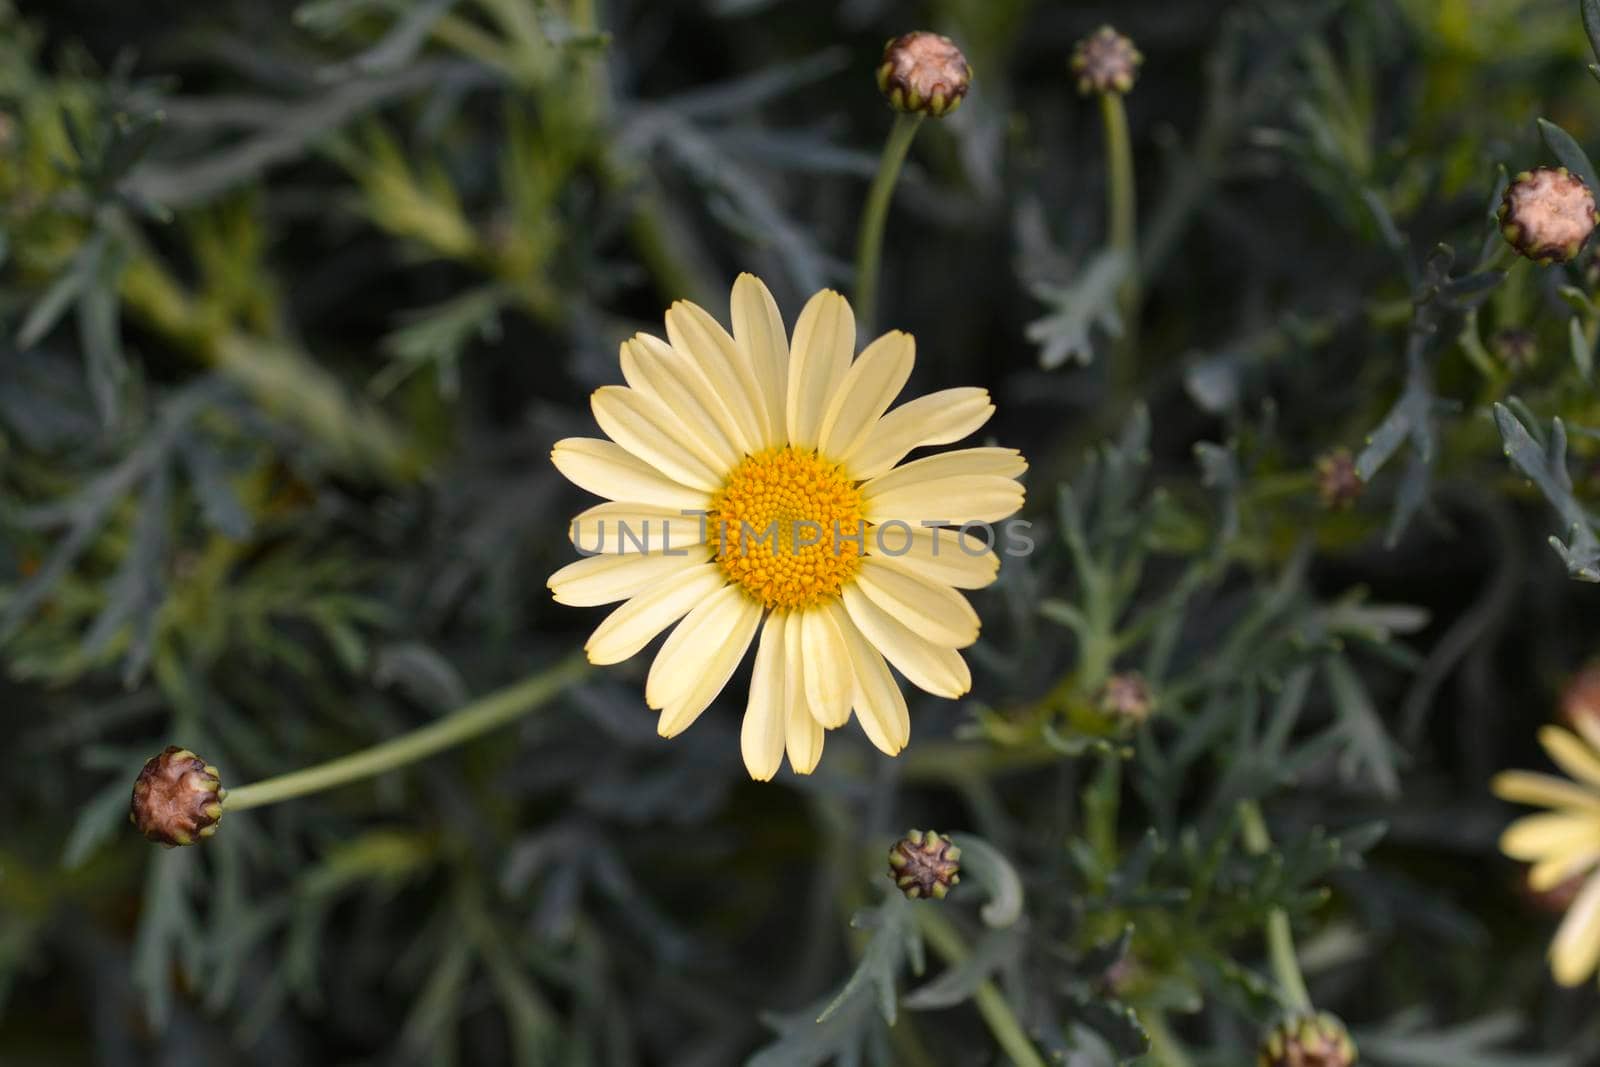 Pale Yellow Marguerite daisy by nahhan